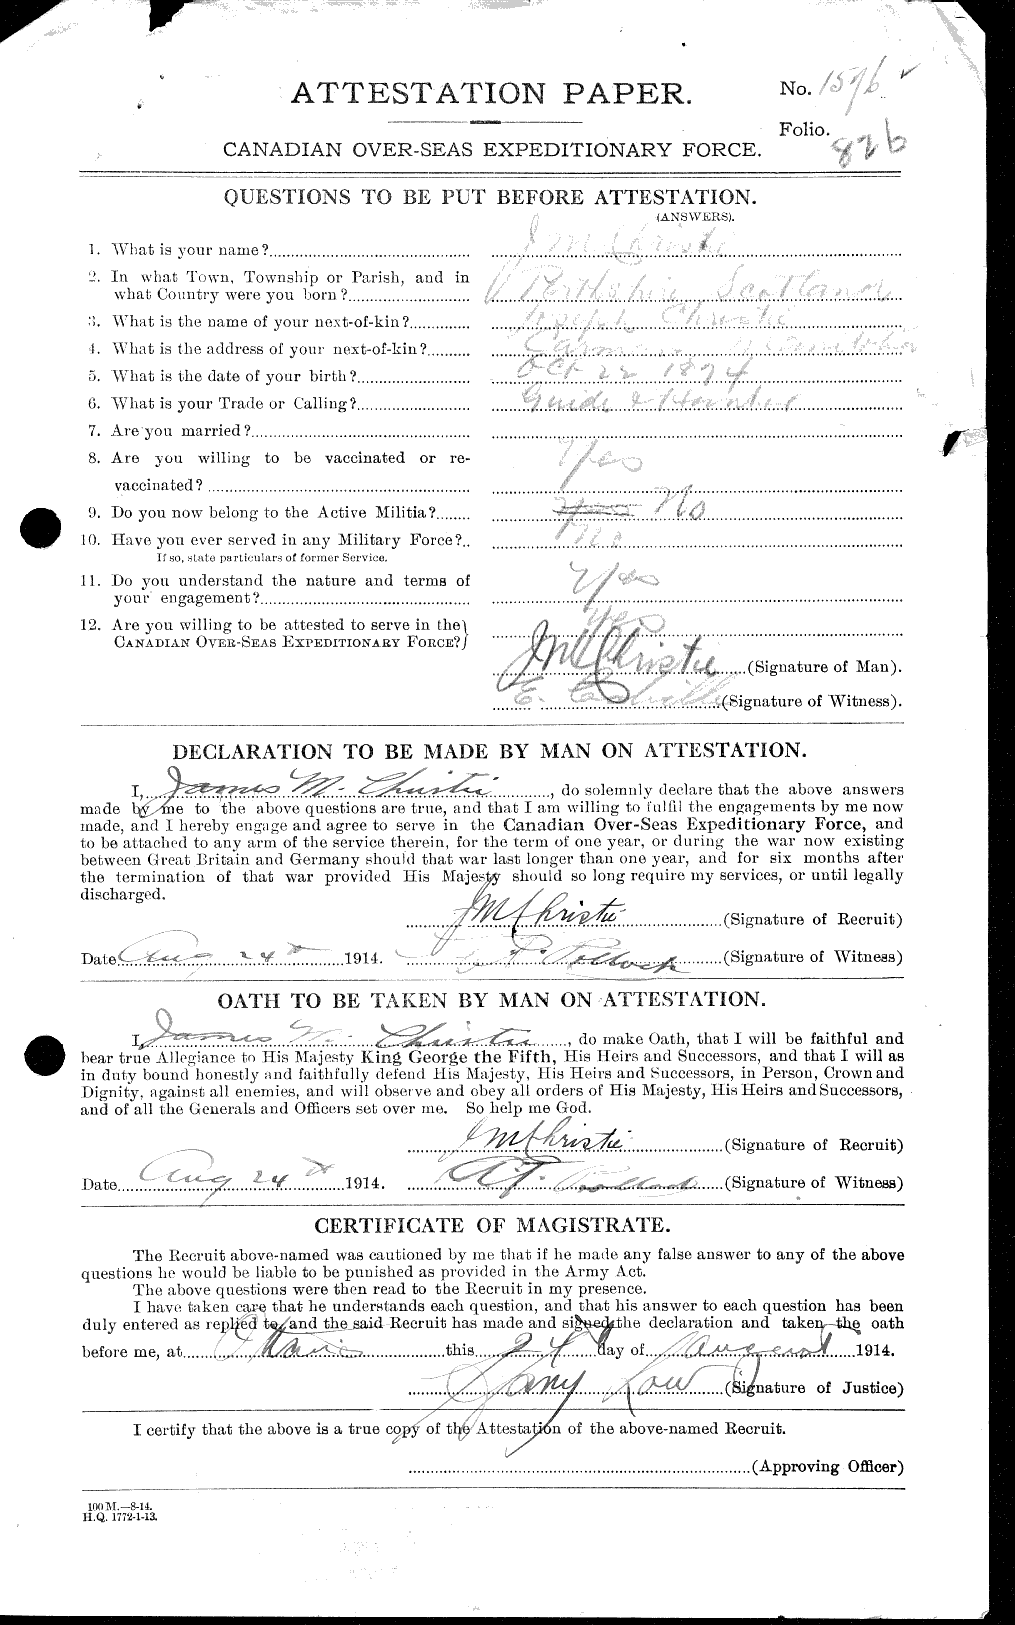 Personnel Records of the First World War - CEF 021987a